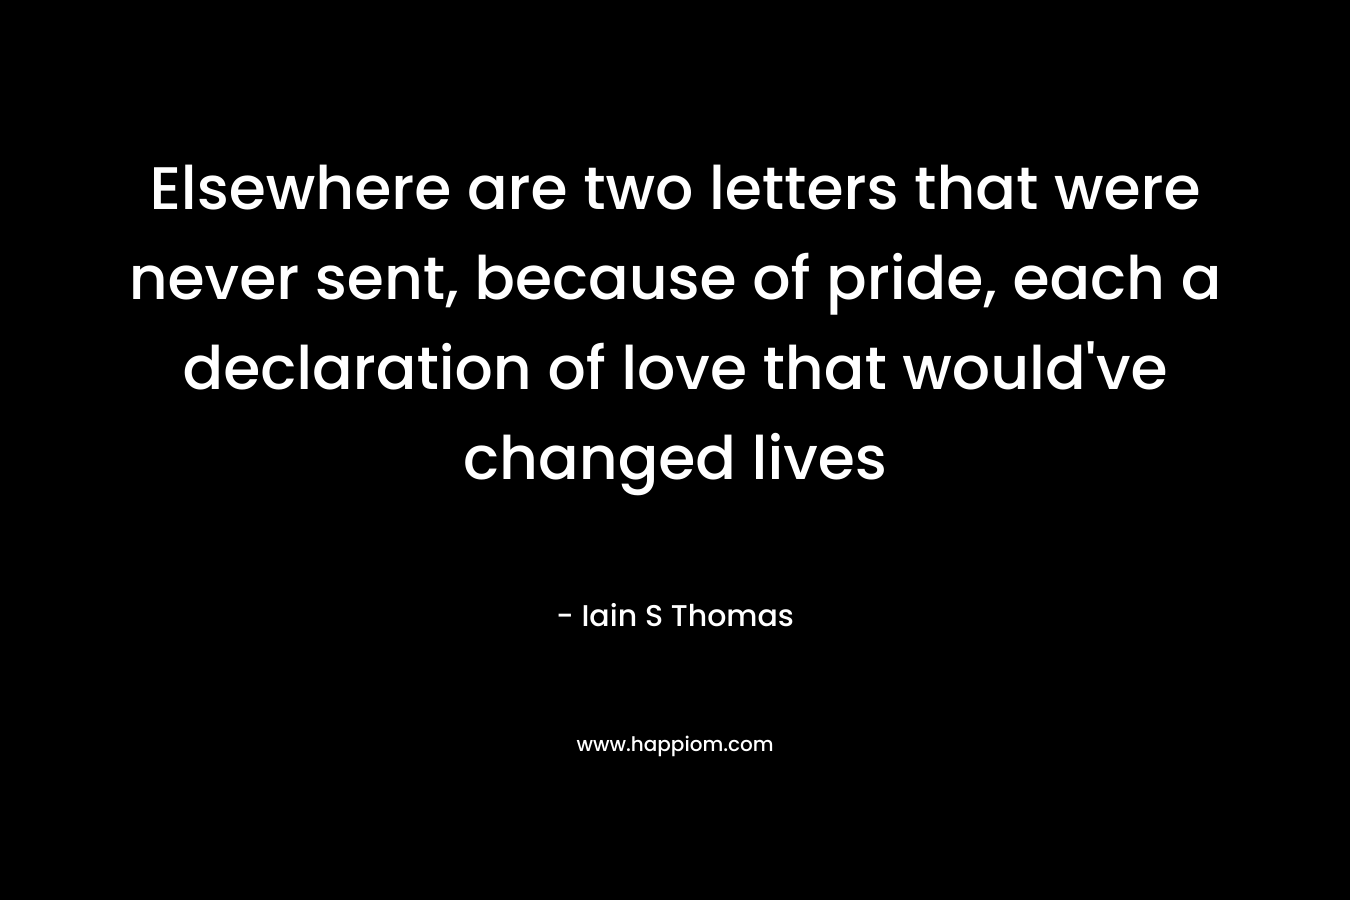 Elsewhere are two letters that were never sent, because of pride, each a declaration of love that would've changed lives